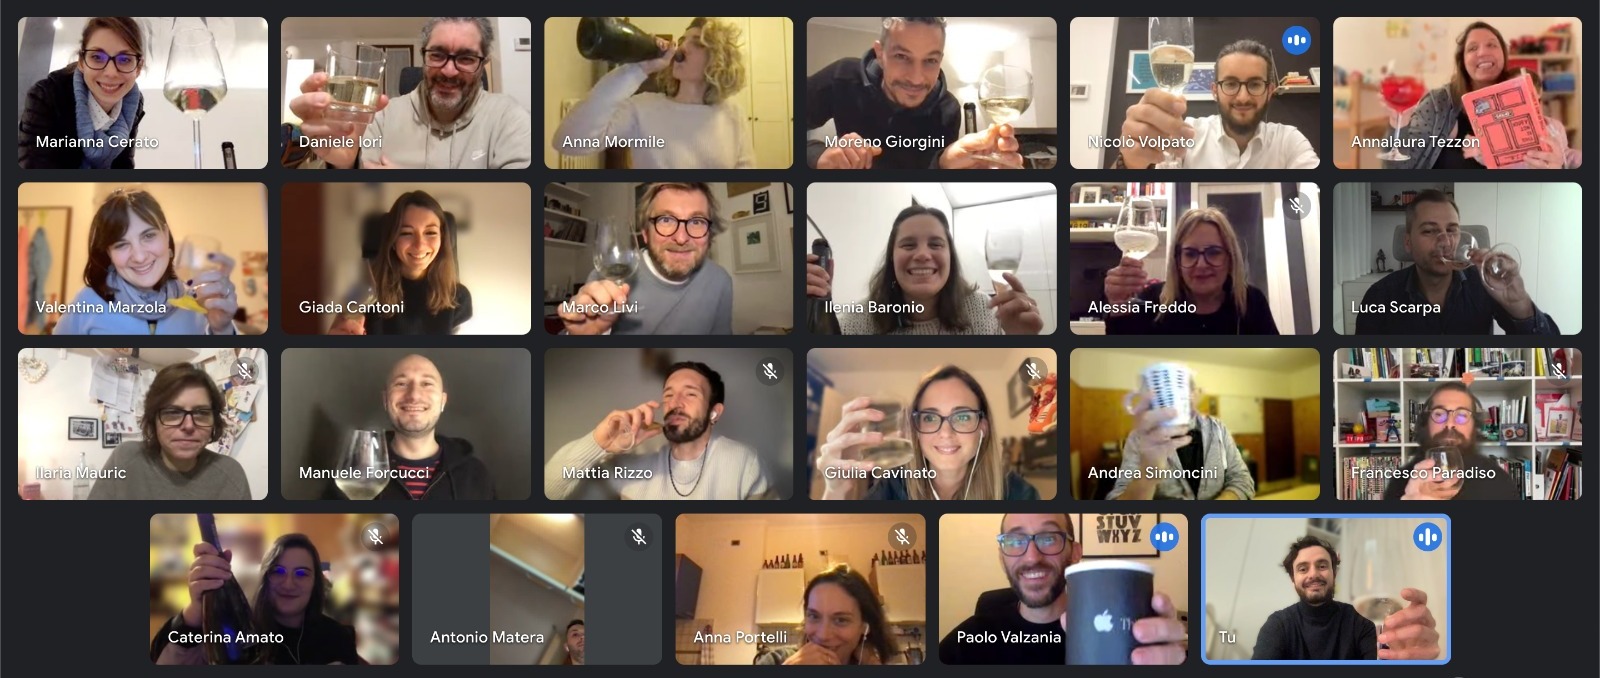 Team Tangible in videocall che brinda